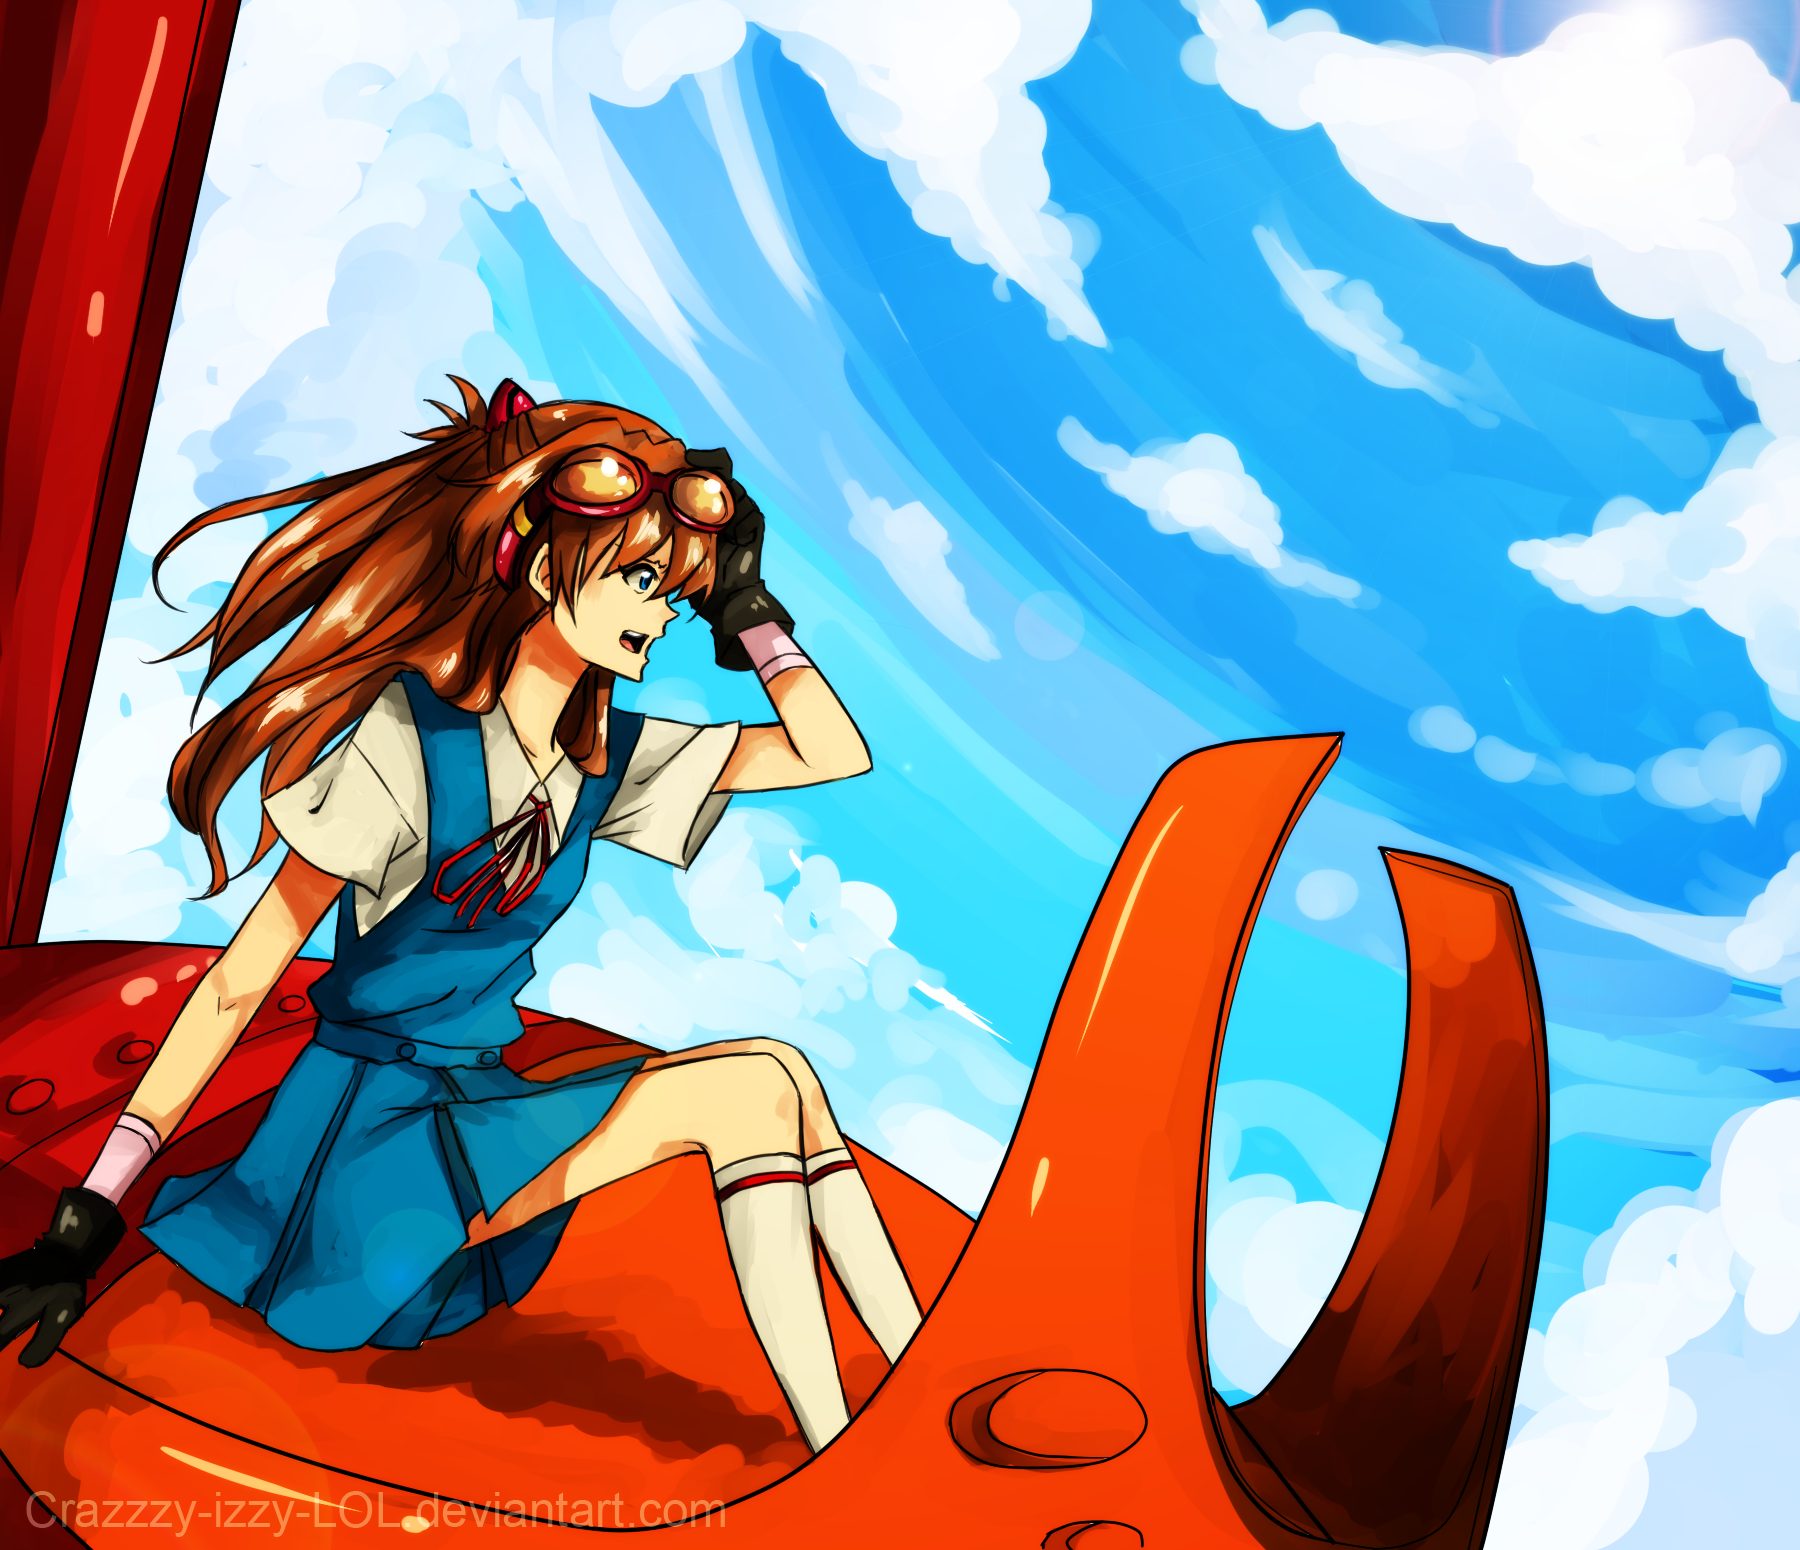 evangelion___asuka_by_crazzzy_izzy_lol-d4v256f.png